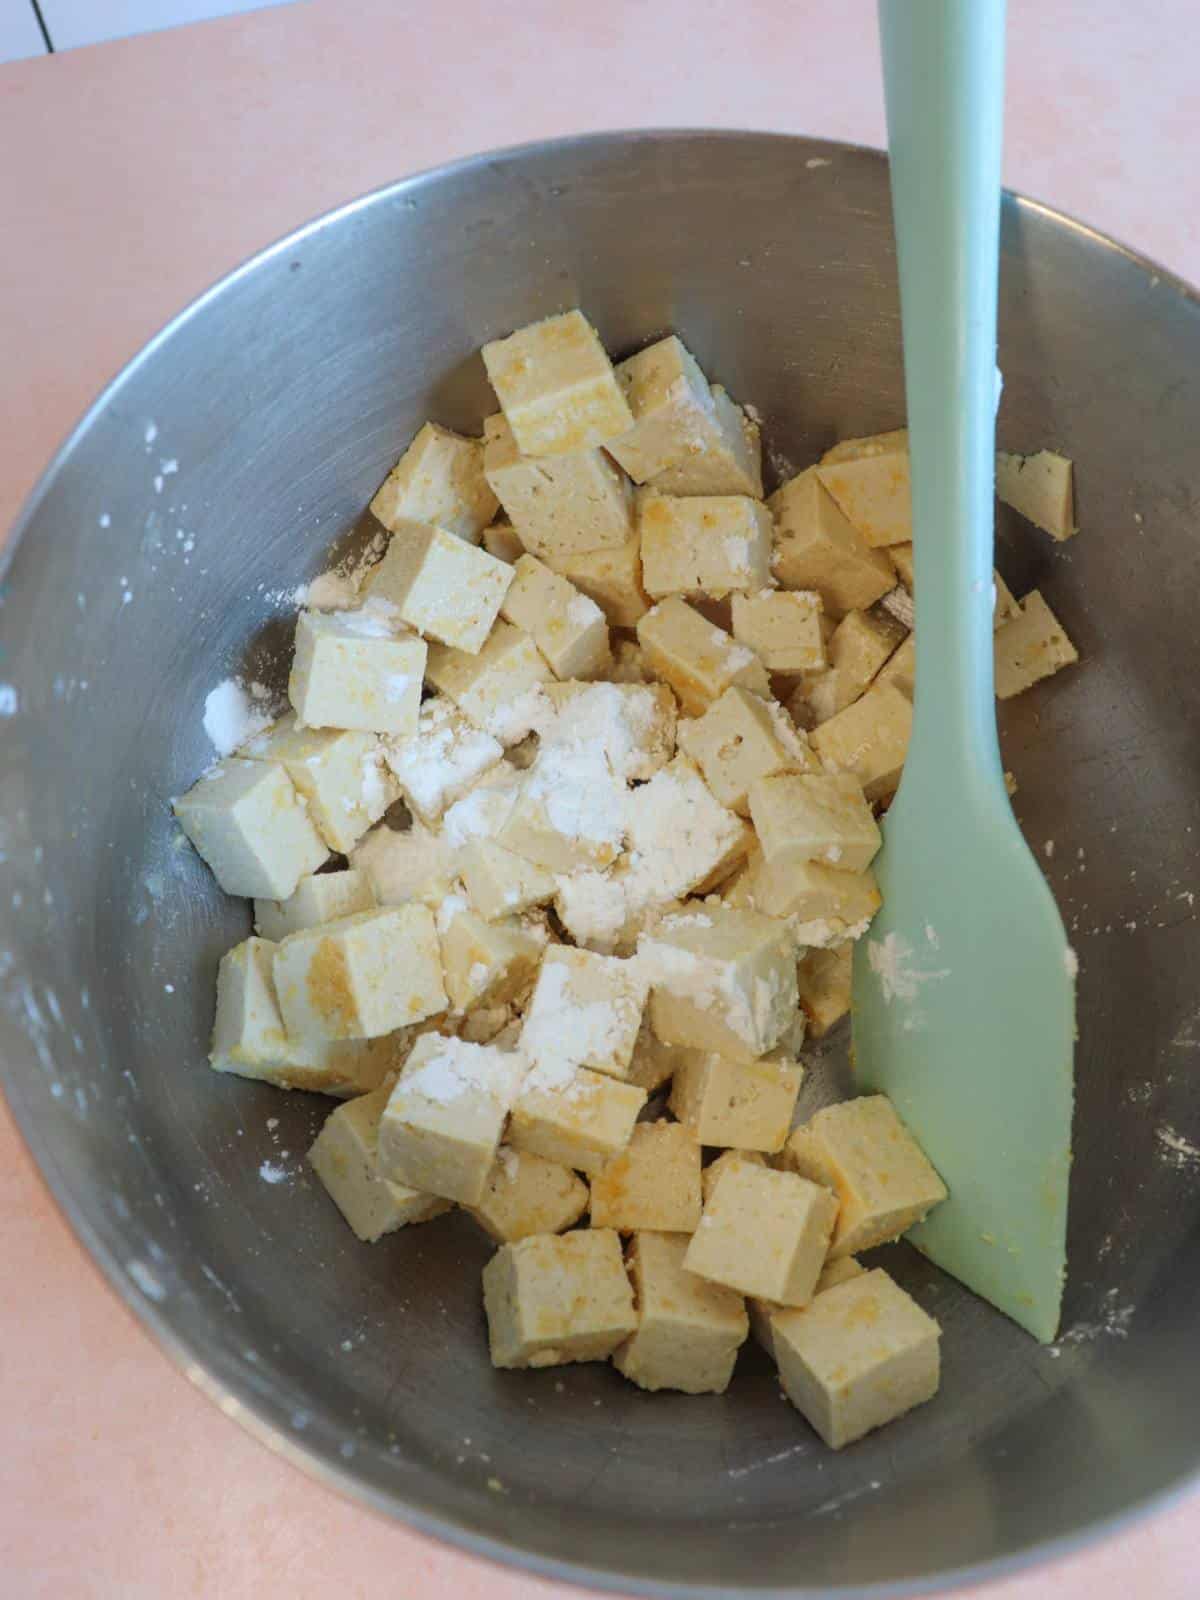 Tofu cubes in a mixing bowl with seasonings and corn starch.